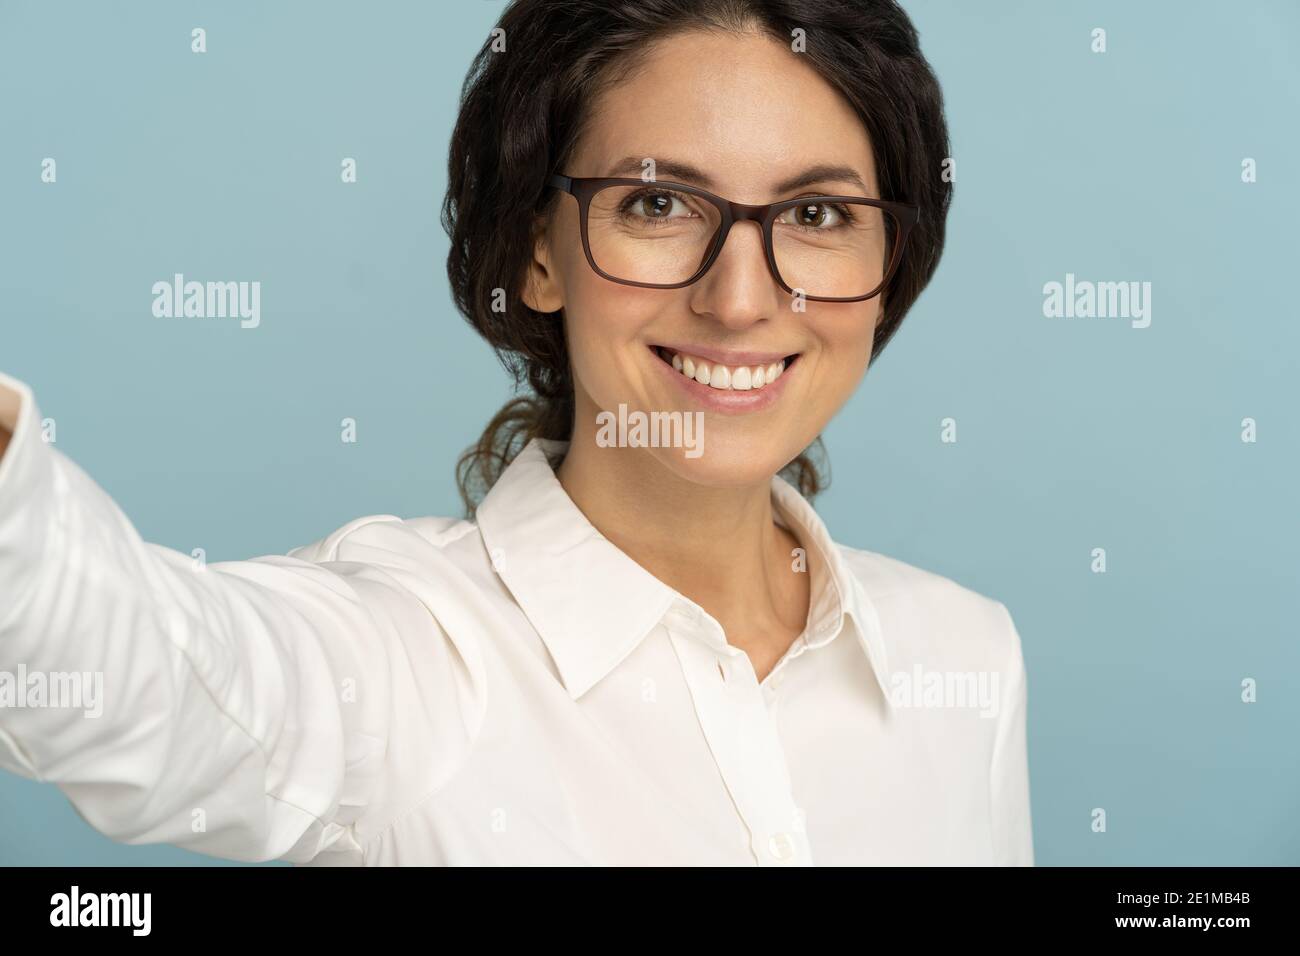 Woman having cheerful expression making selfie, stretching arm to camera, photographing herself Stock Photo